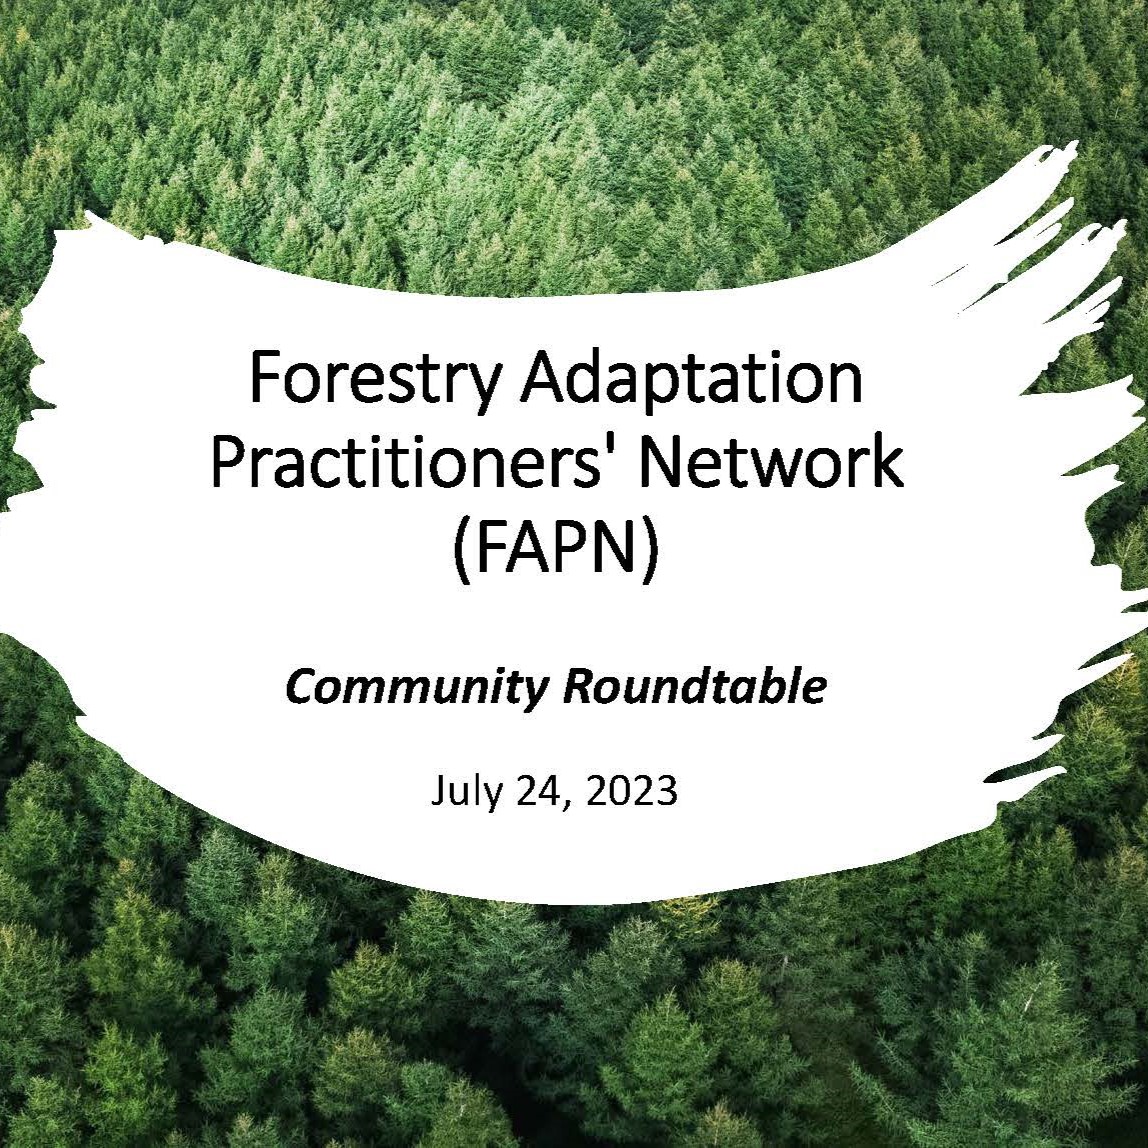 Slide intro page with forest background and text that reads "Forestry Adaptation Practitioners' Network (FAPN) Community Roundtable"